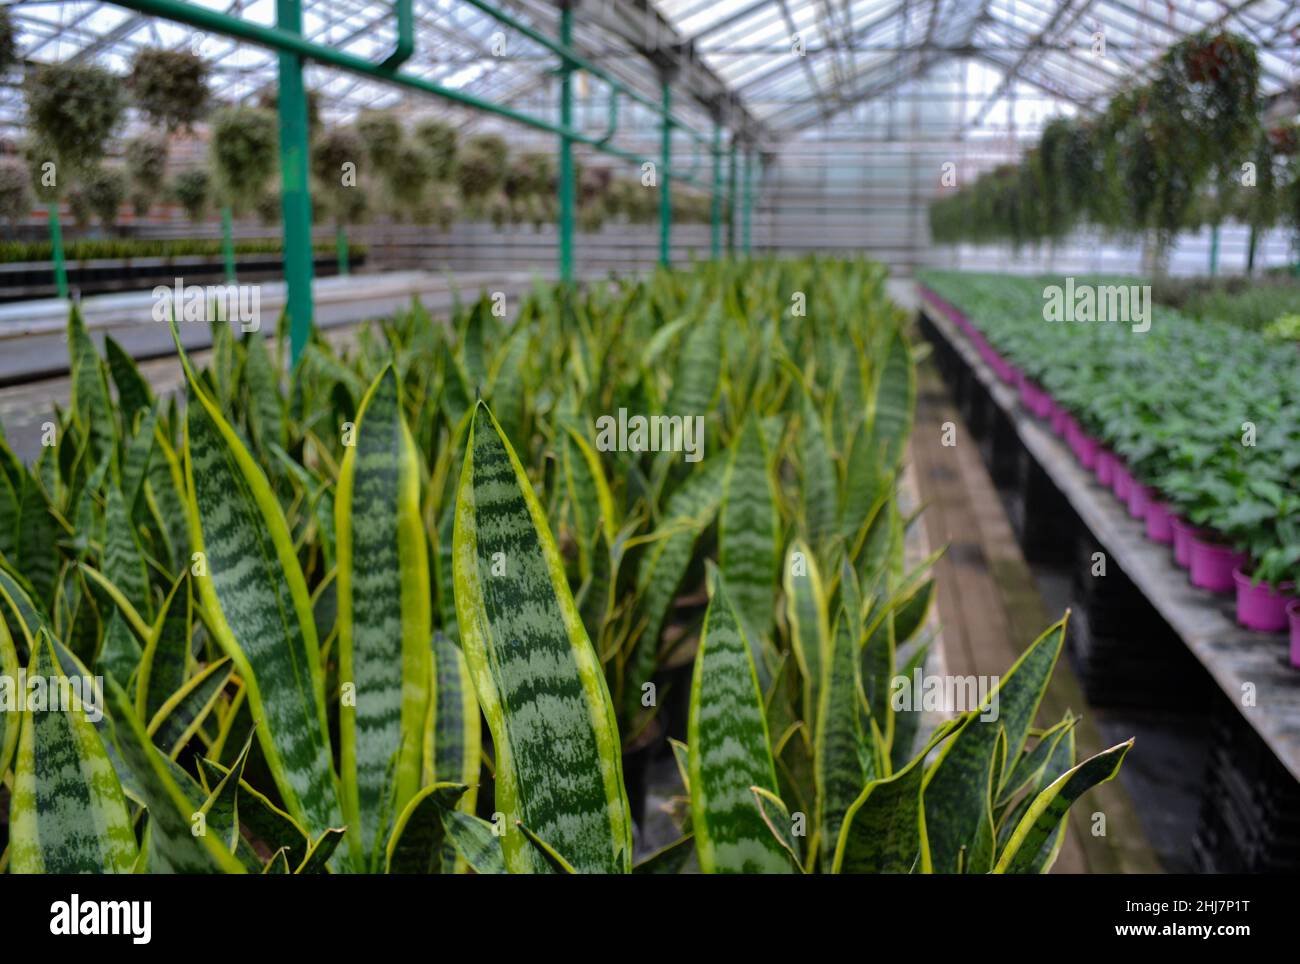 Plant sansevieria, known as snakeskin or pike tail, with striped long leaves. On a blurred background are pink flower pots with coffee plants, at the Stock Photo